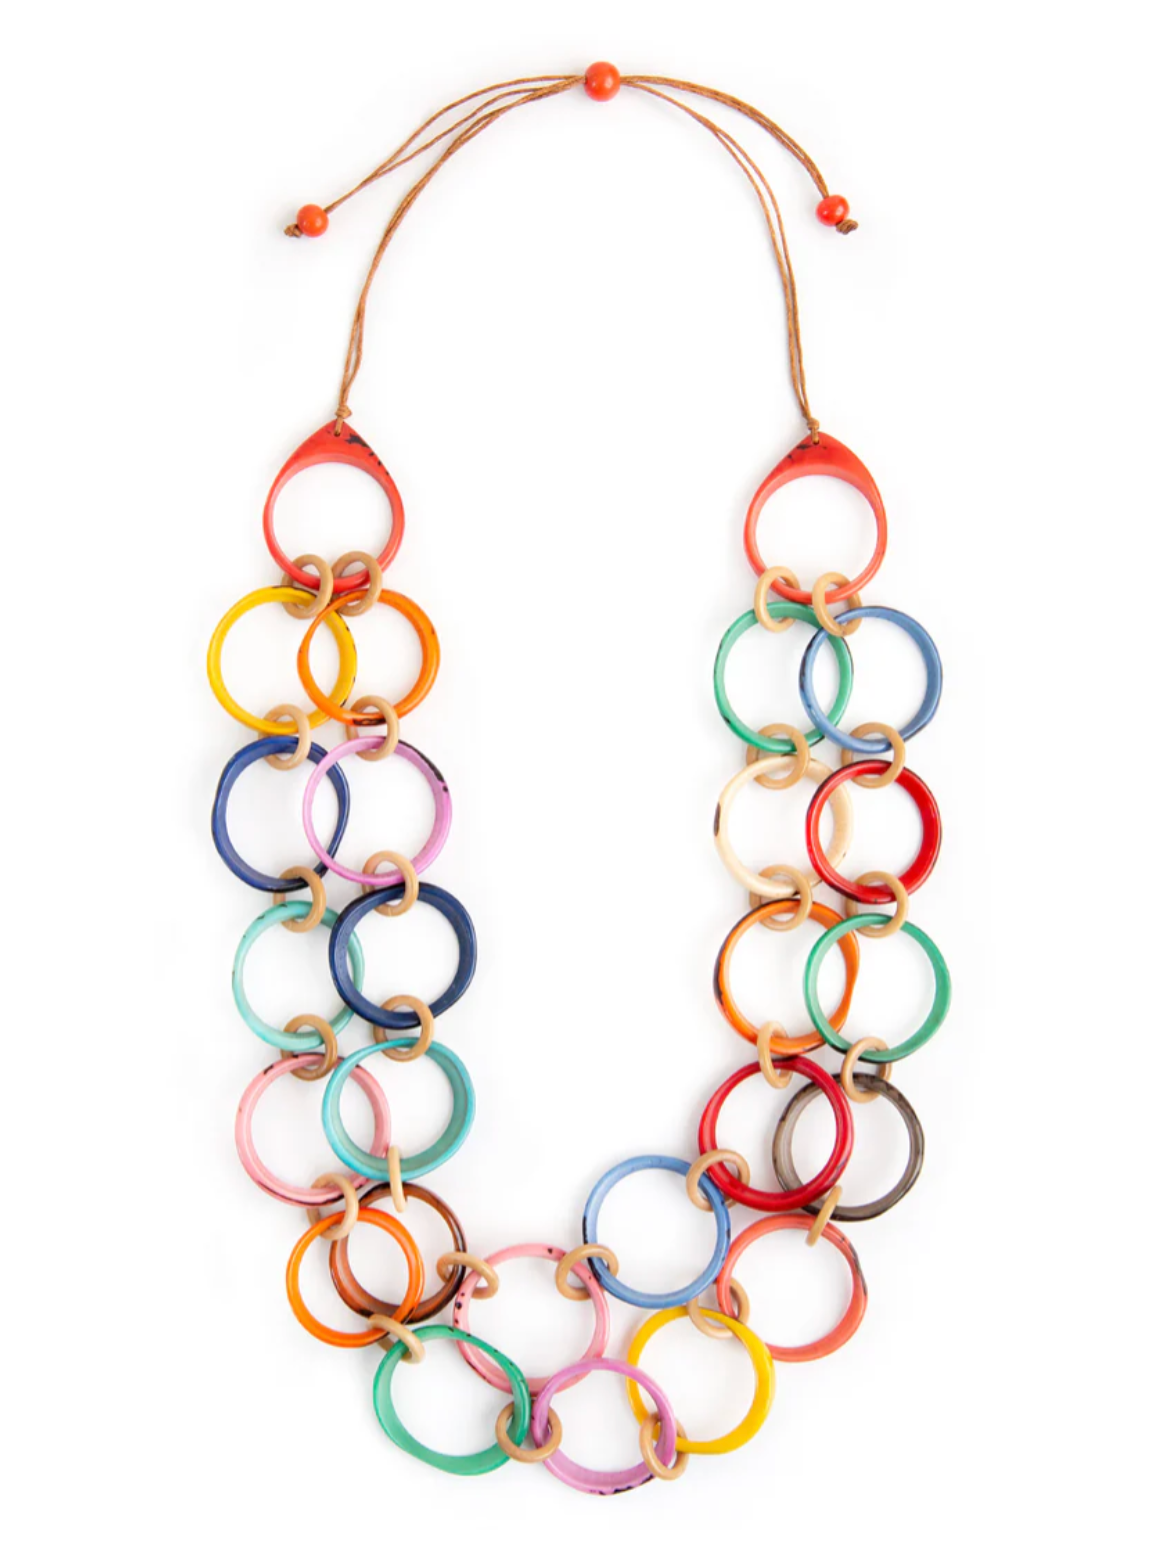 Tagua Long Ring of Life Necklace